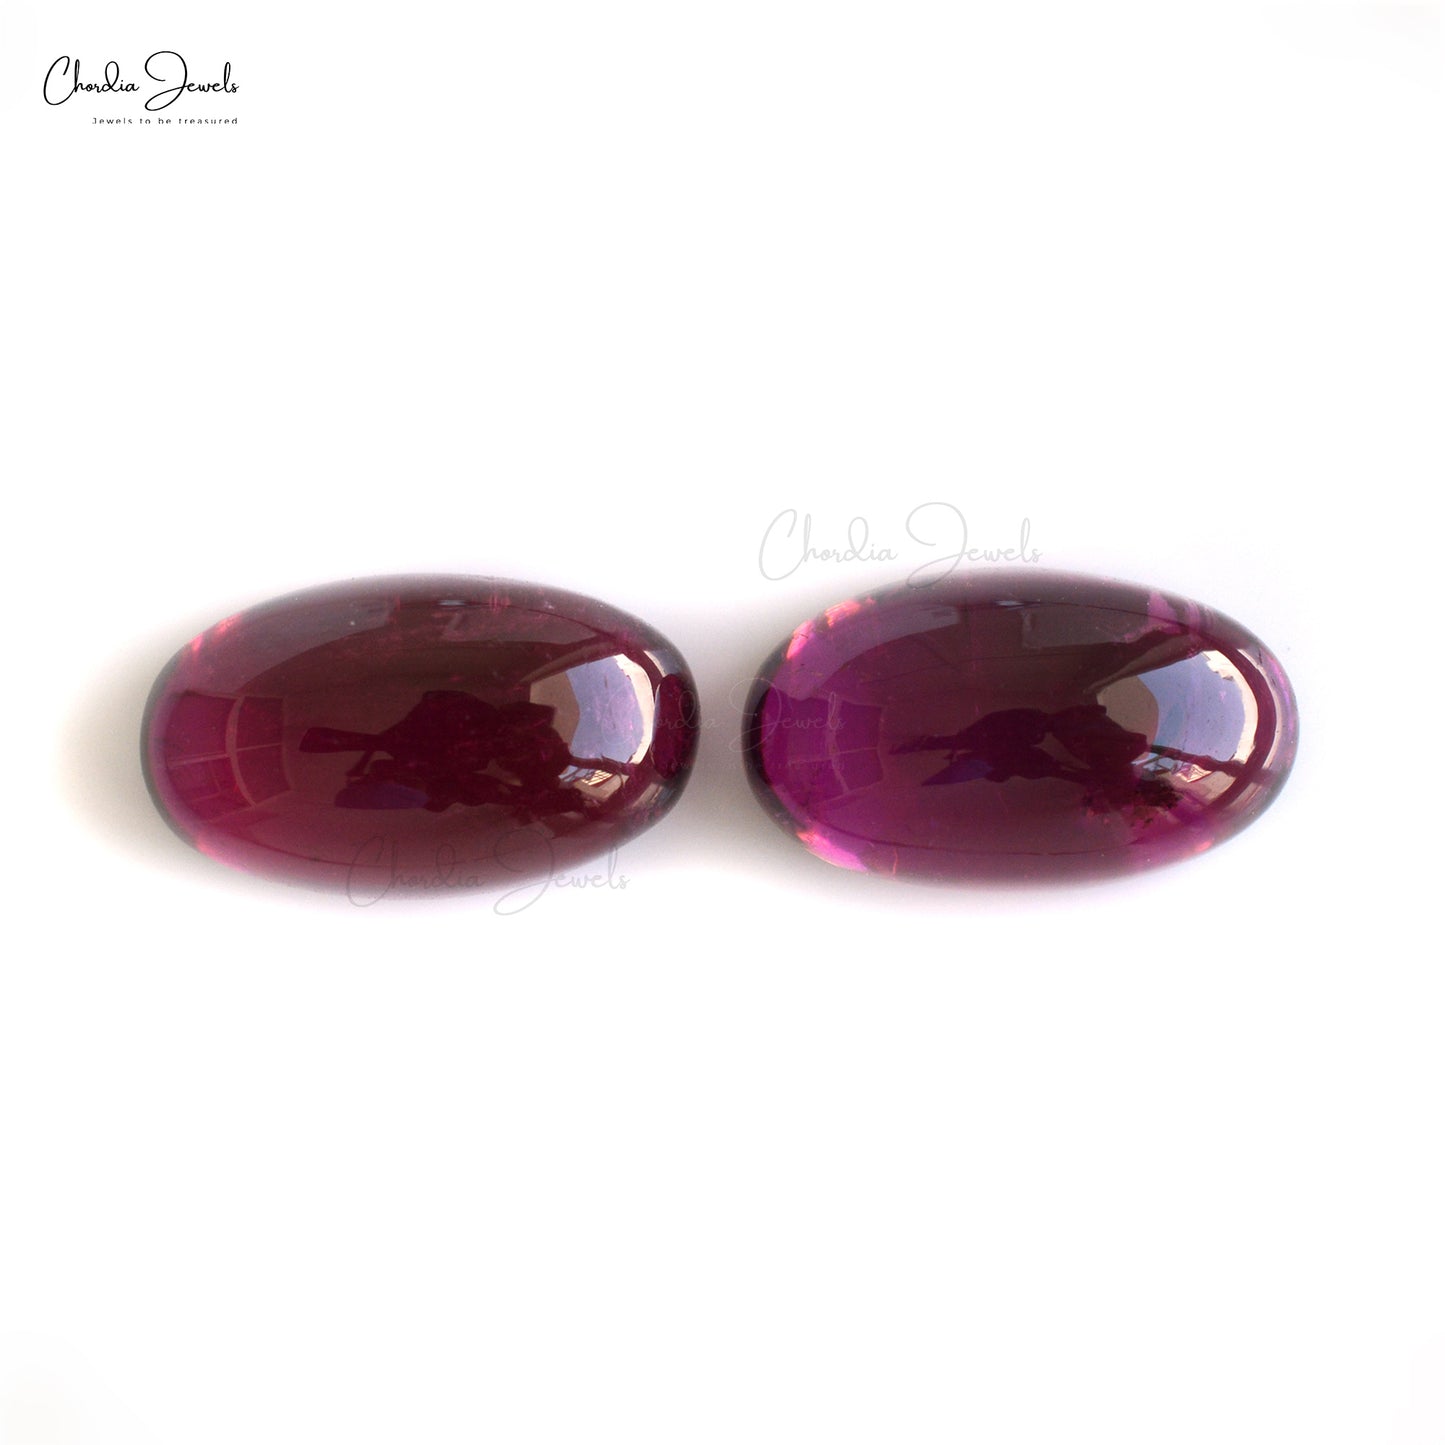 Load image into Gallery viewer, 12X7X5MM Oval Cabochon Rubellite Tourmaline Gemstone Wholesaler from India, 2 Piece
